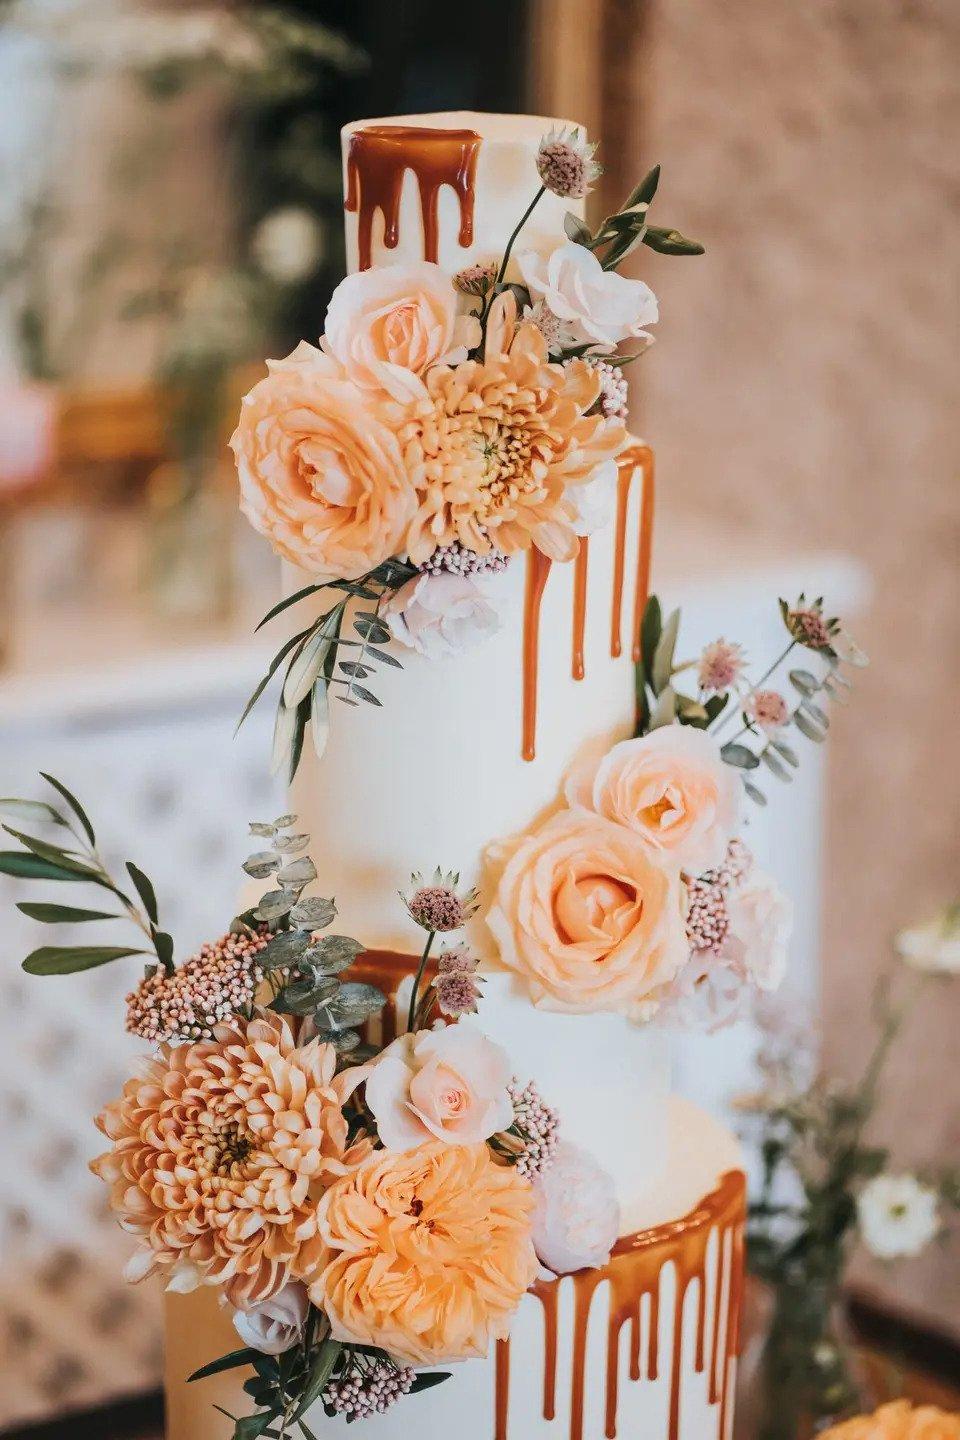 These wedding cakes are works of art - Rose gold cake